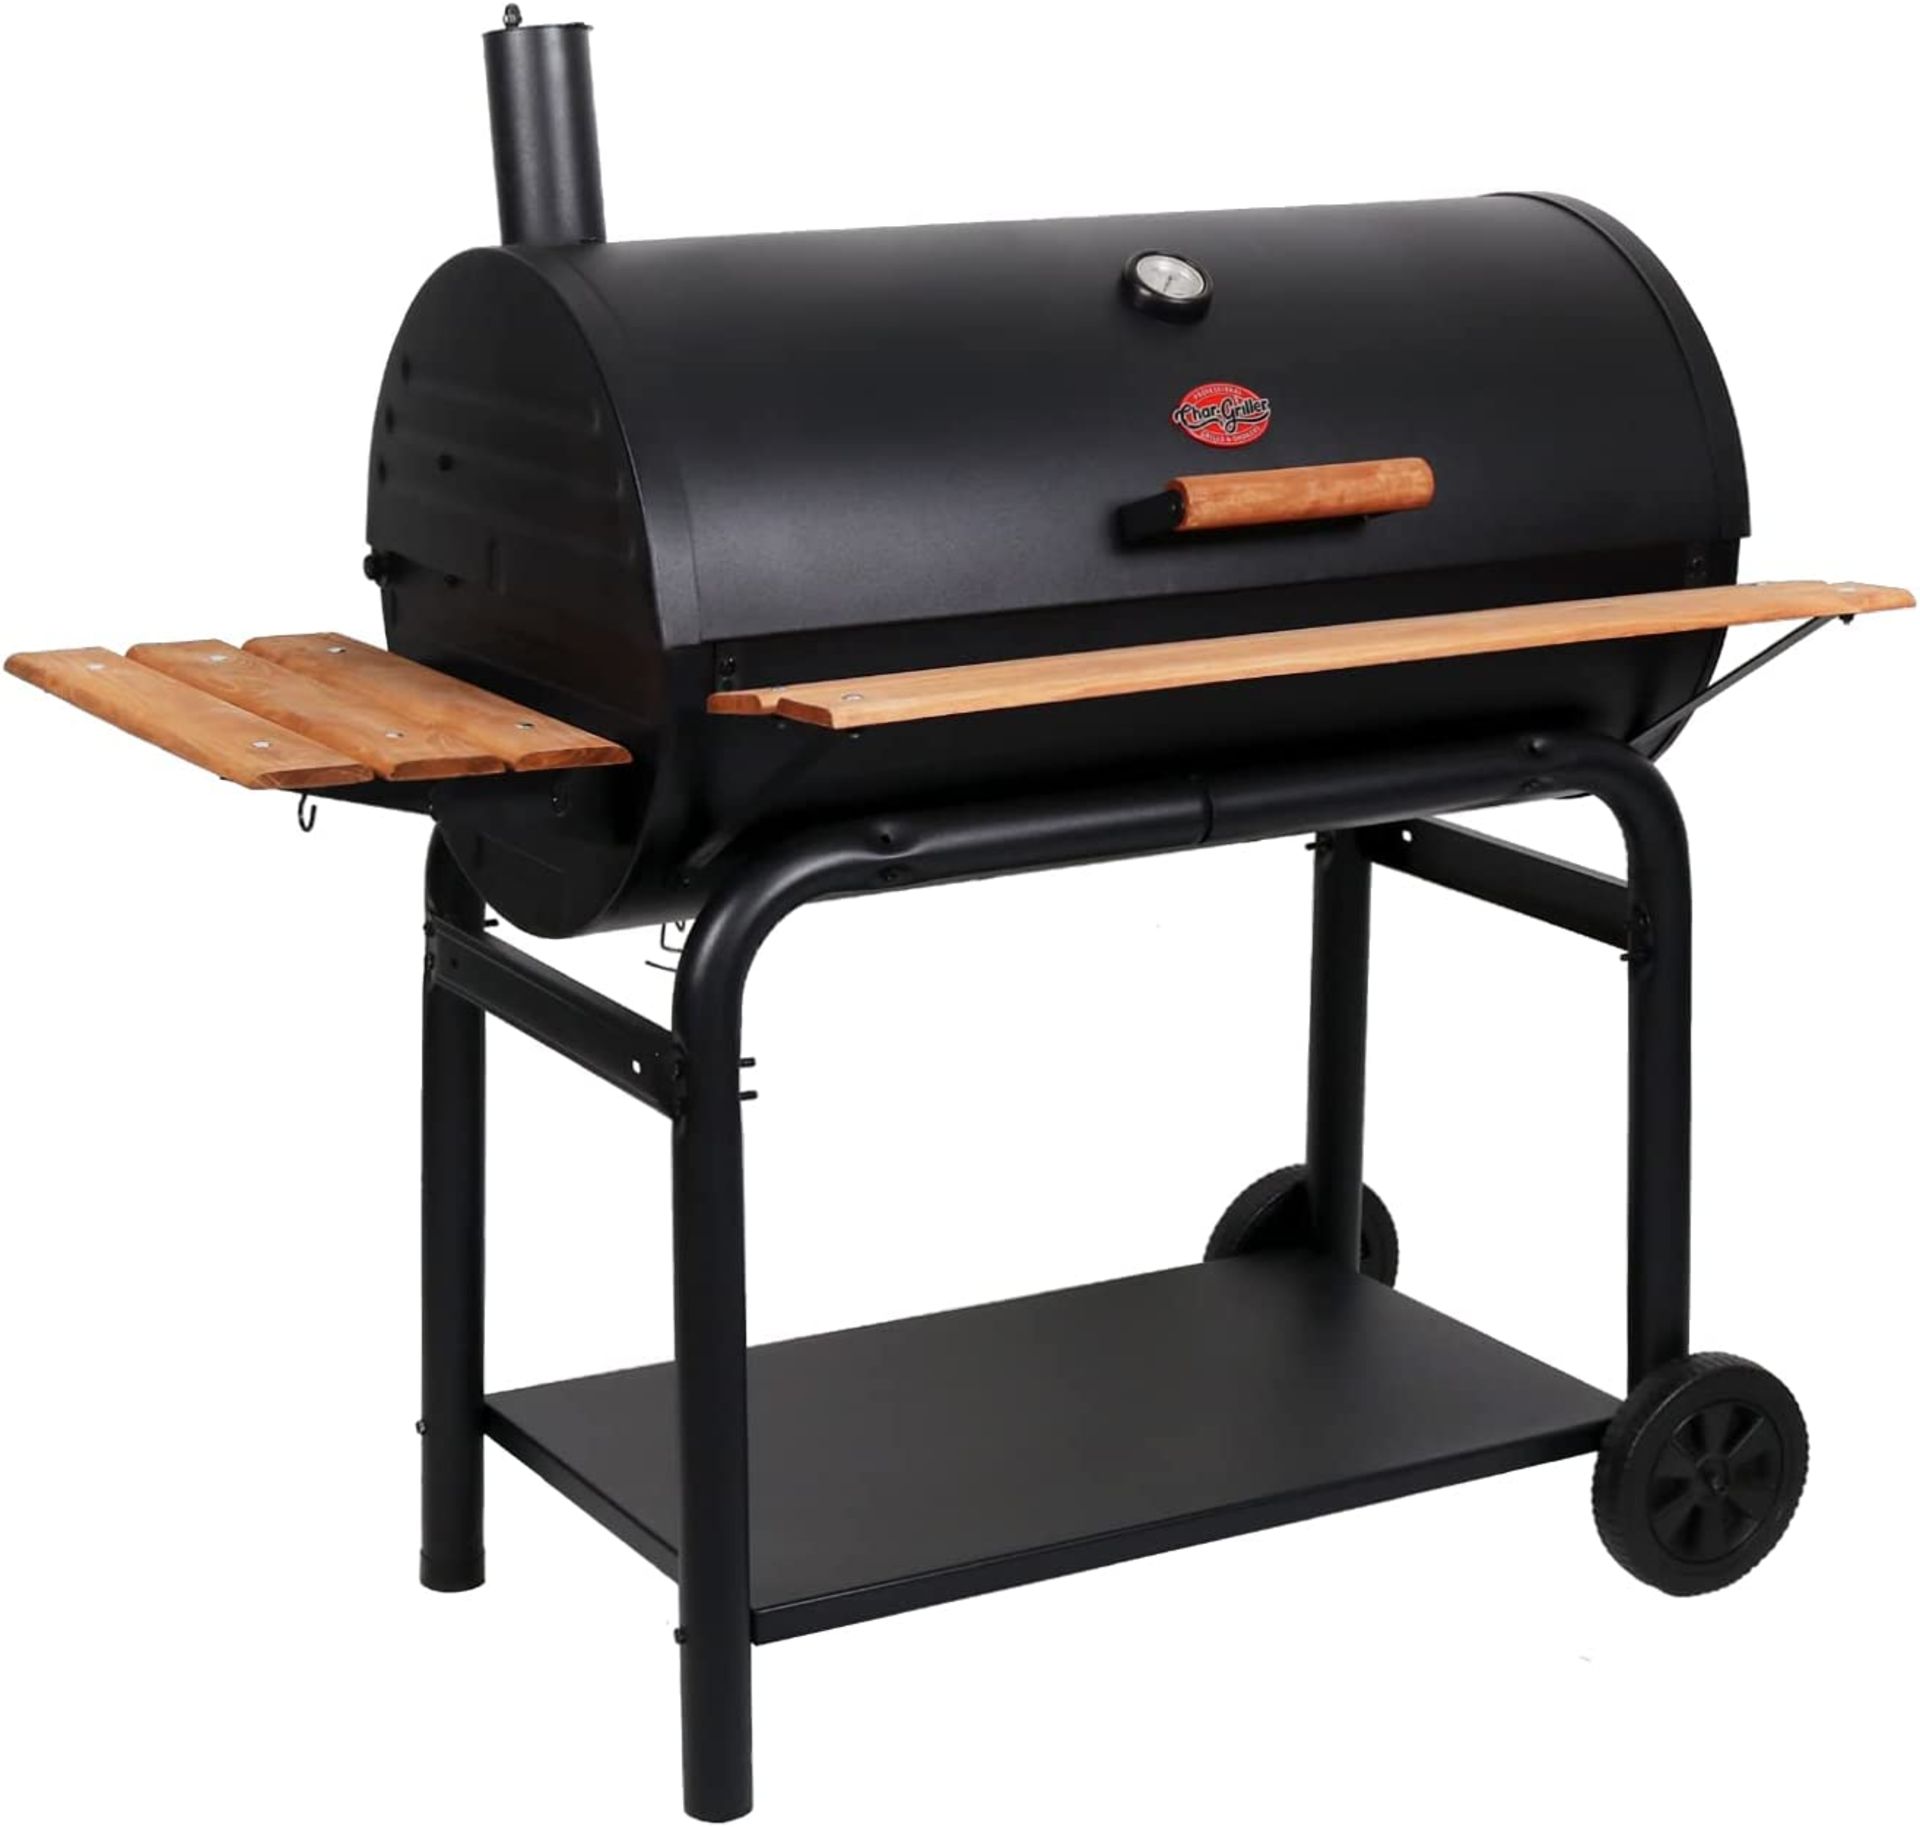 BRAND NEW CHAR GRILLER 2137 OUTLAW 1038 SQUARE INCH CHARCOAL GRILL/SMOKER - Image 12 of 12